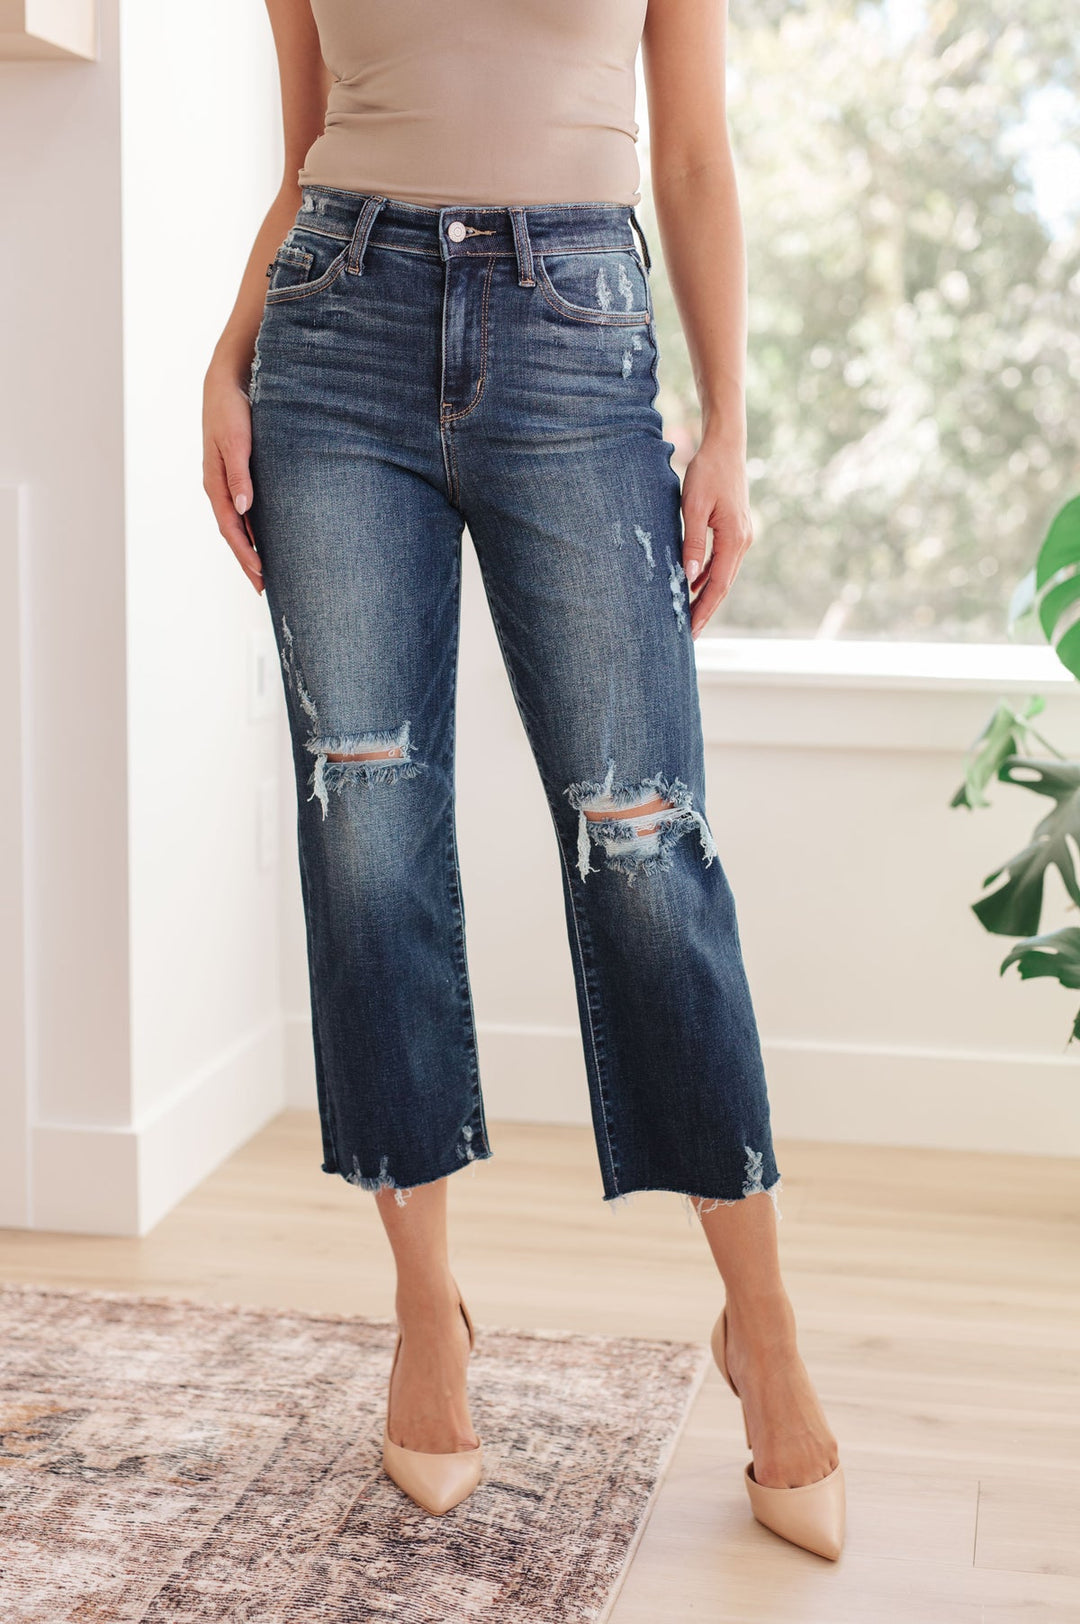 Judy Blue - Dark Wash Cropped Jeans - Inspired Eye Boutique